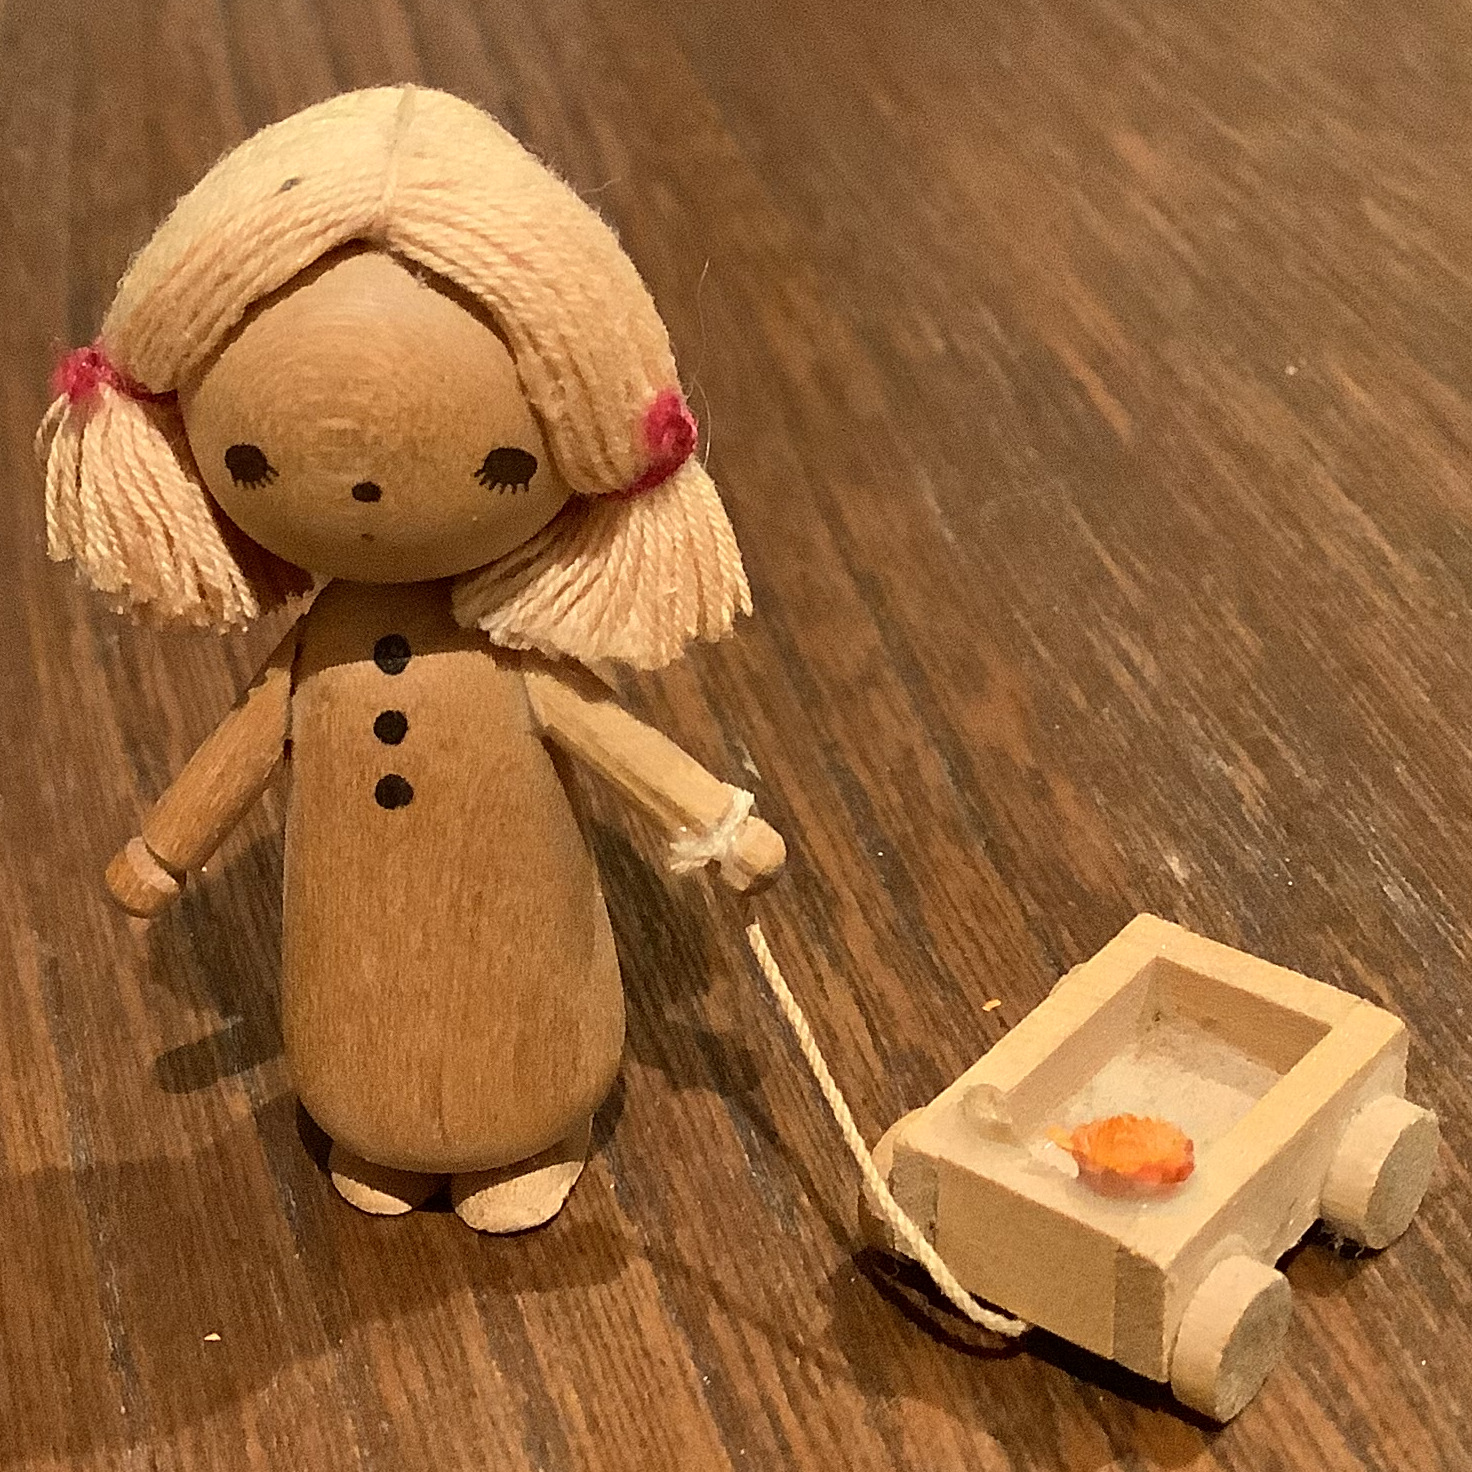 Minimalist wooden doll with yarn hair and painted face pulling a small wooden wagon containing a small, unidentifiable orange object